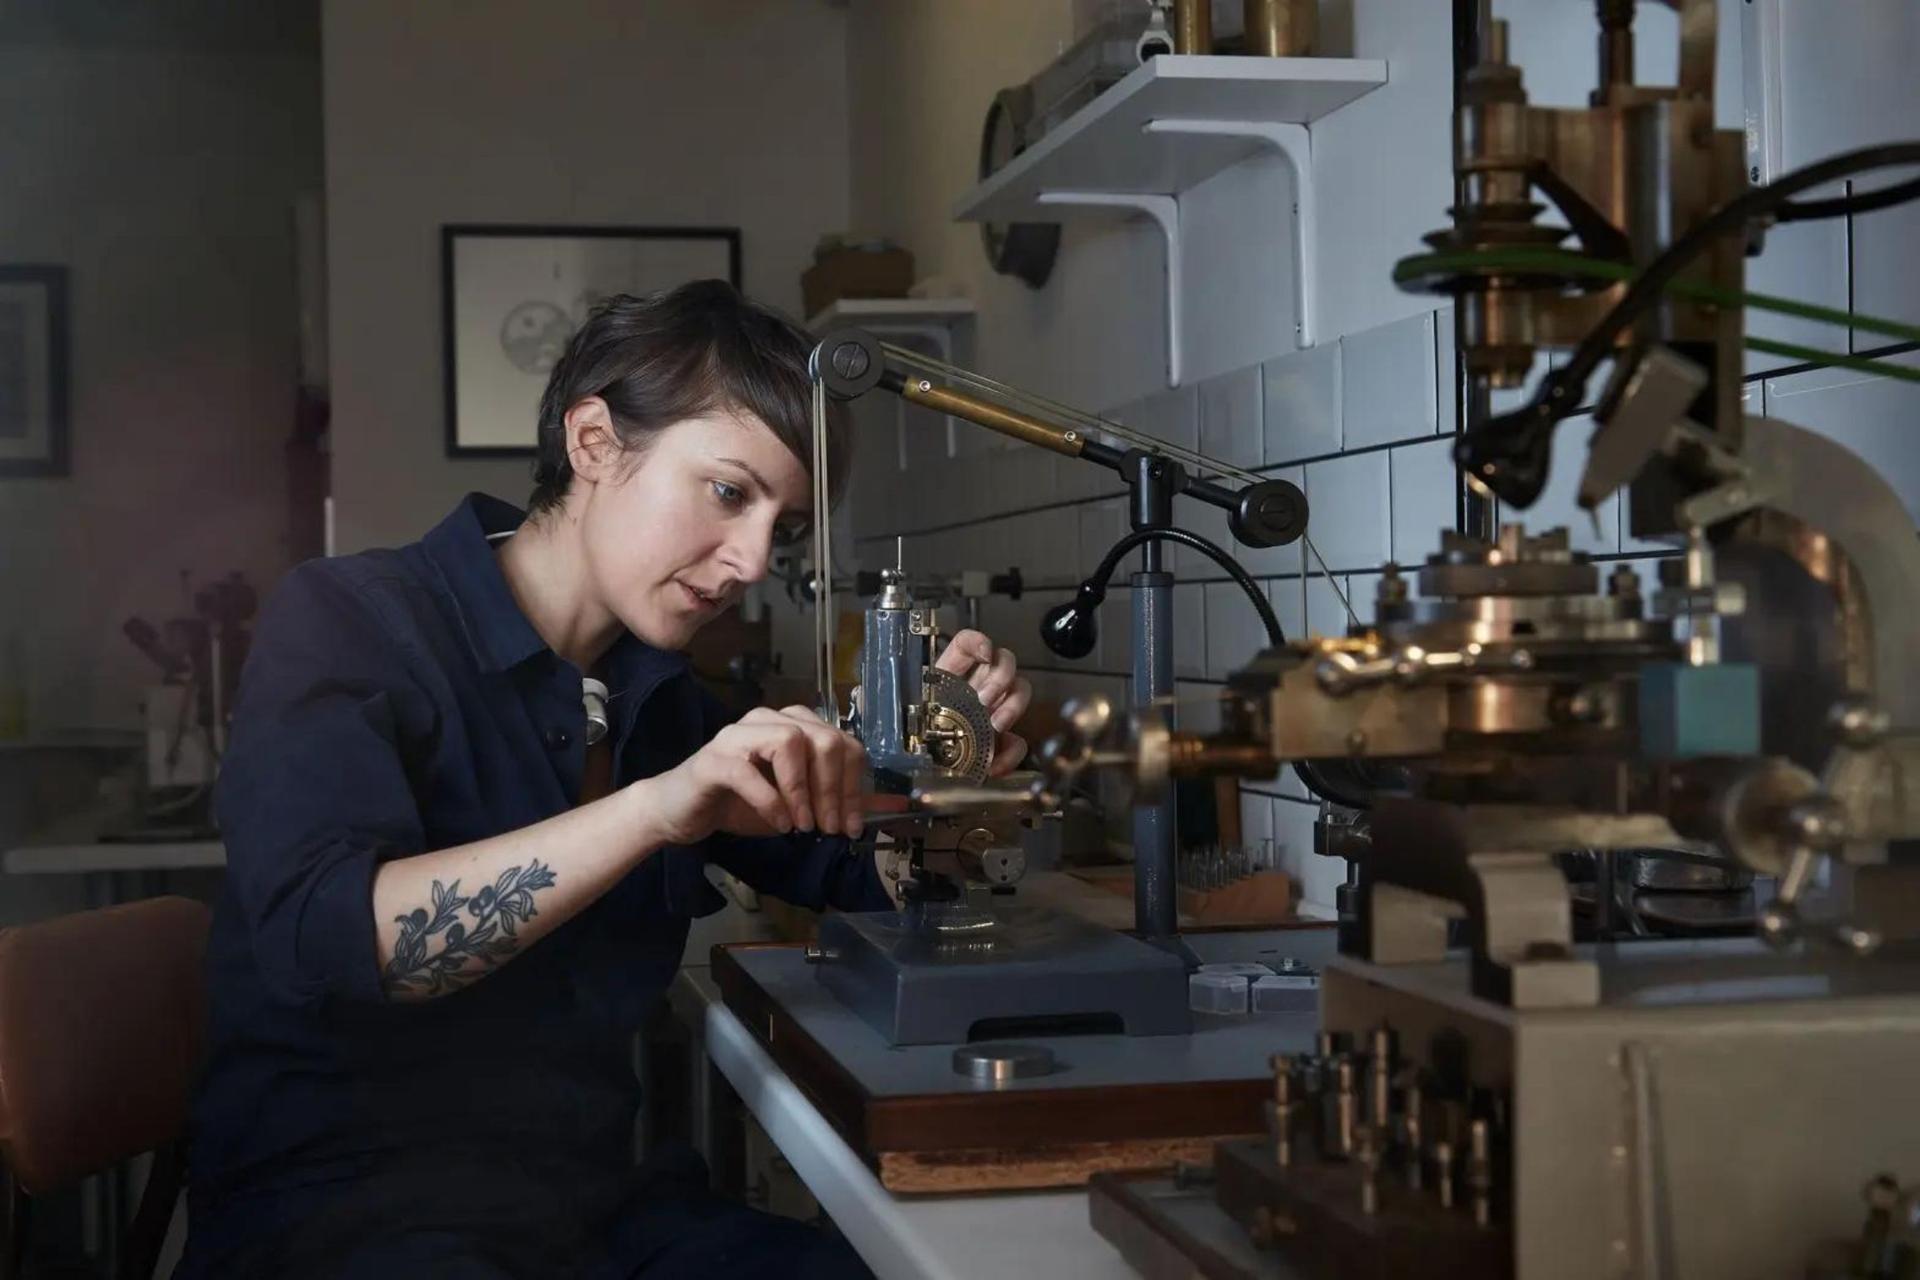 Rebecca Struthers and her husband Craig have been making customized timepieces inspired by traditional English horology and goldsmithing Photo: Andy Pilsbury